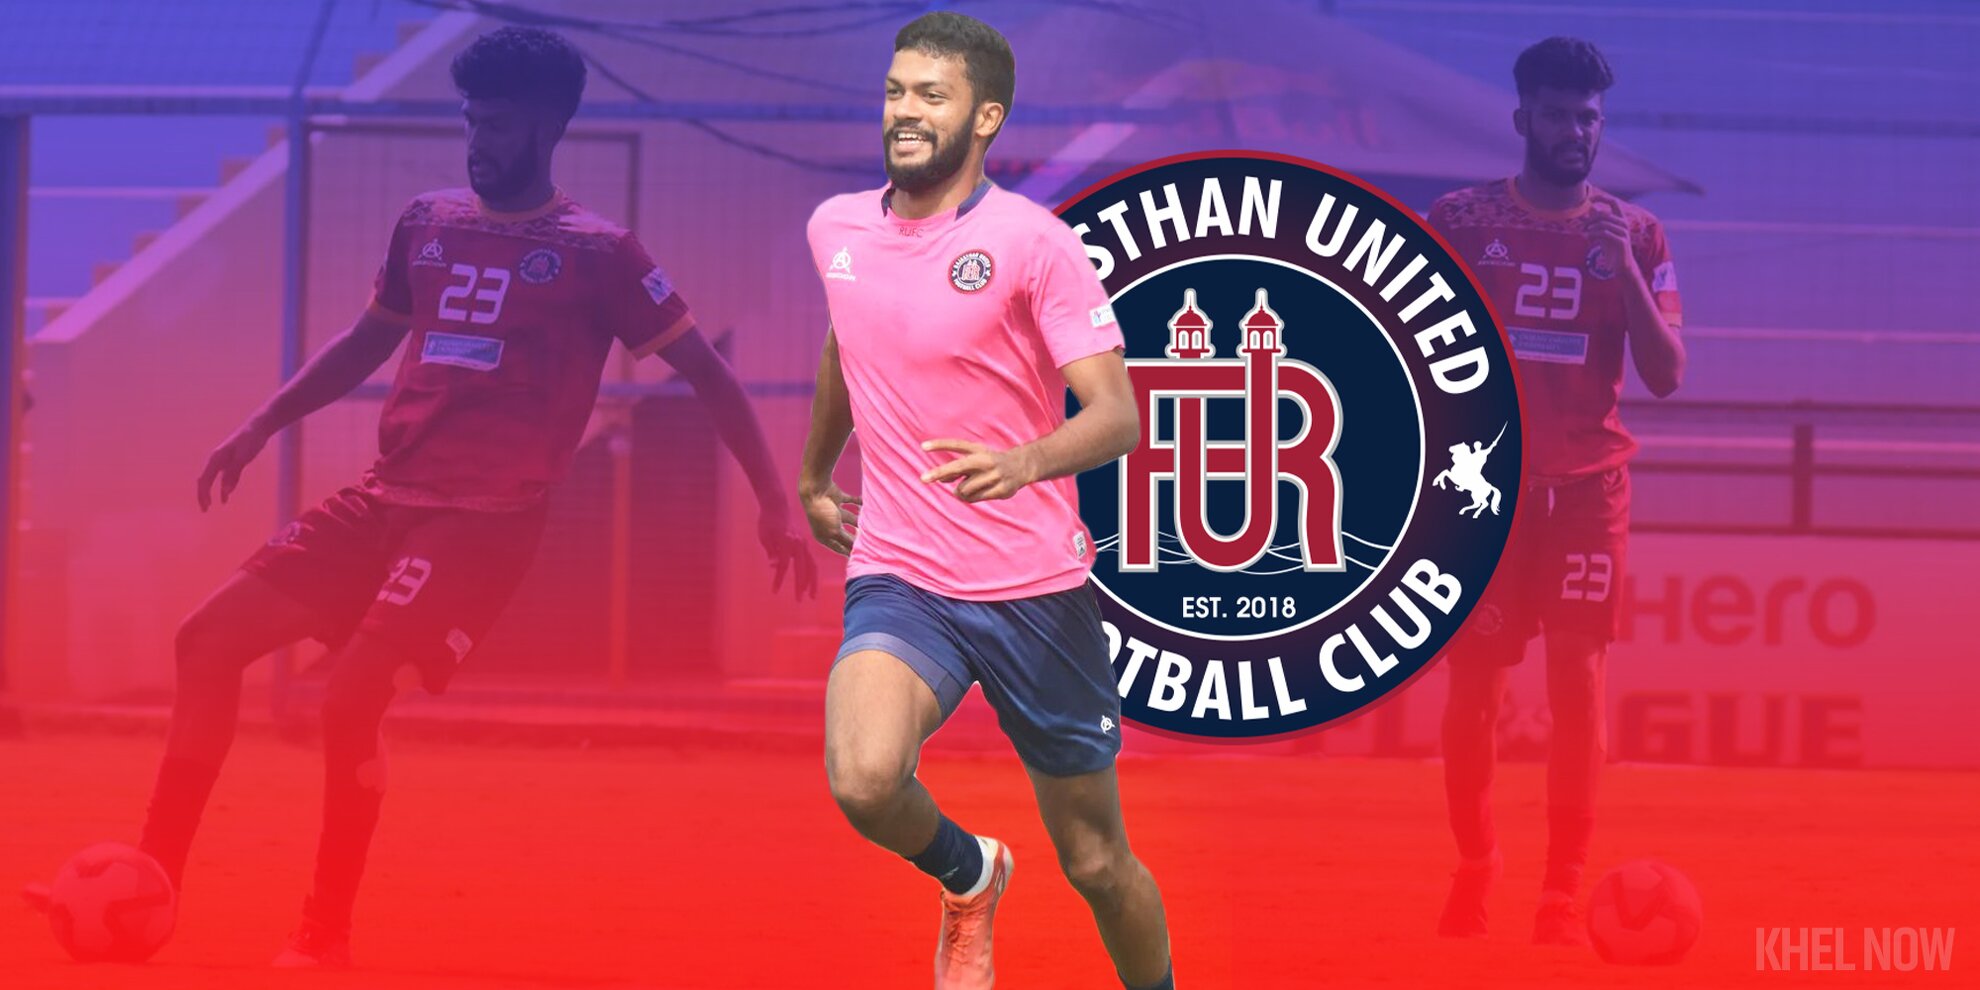 Melroy Assisi Rajasthan United I-League